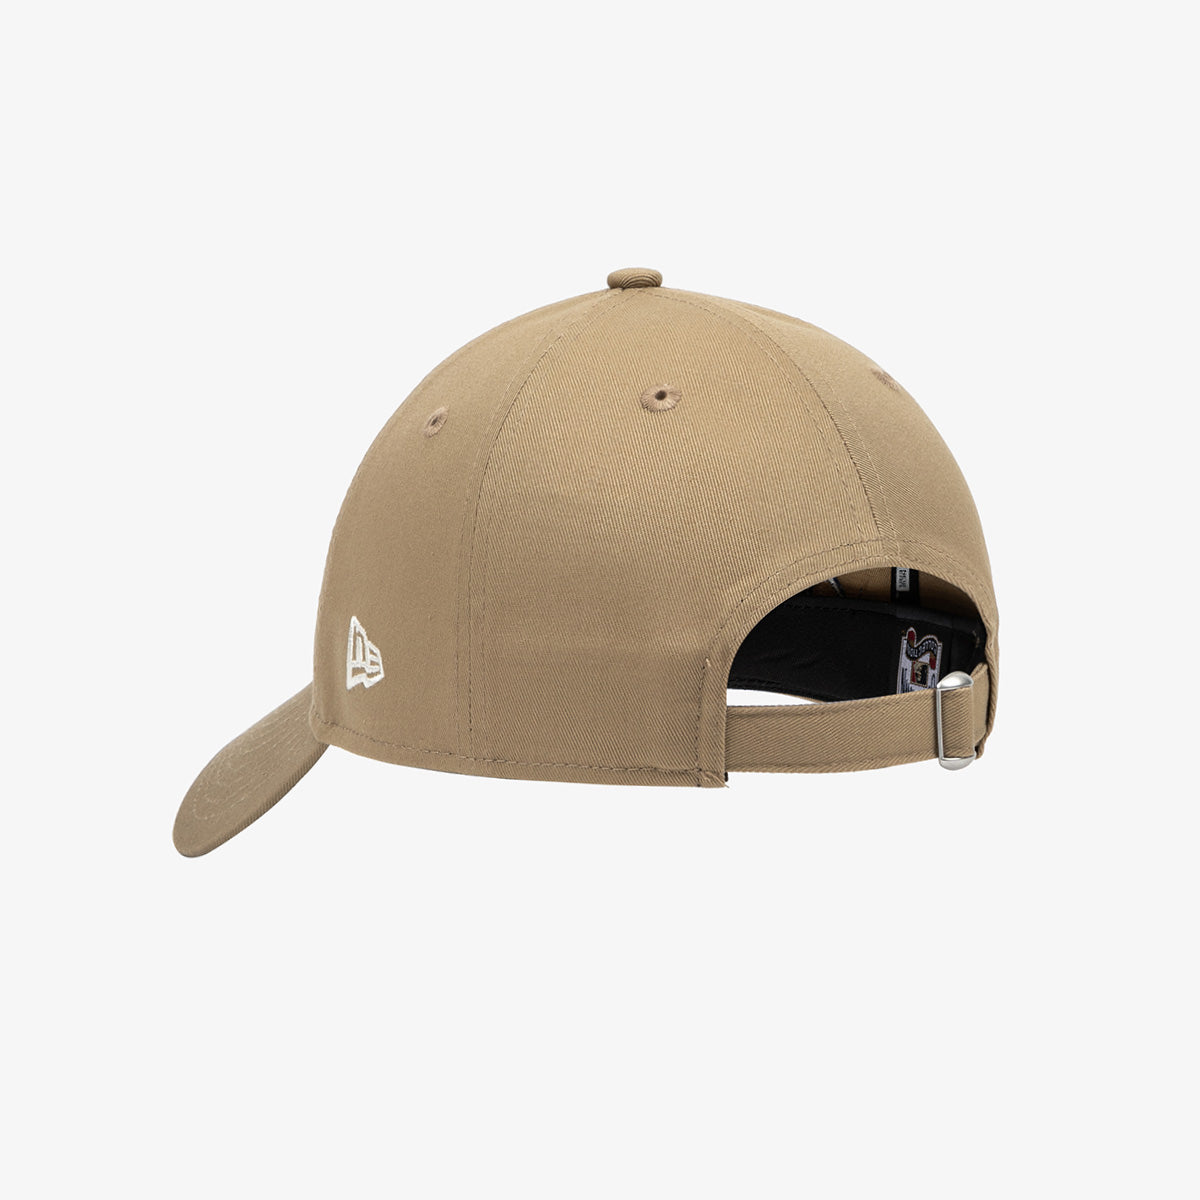 BROOKLYN DODGERS GOLD 9FORTY UNST CAP